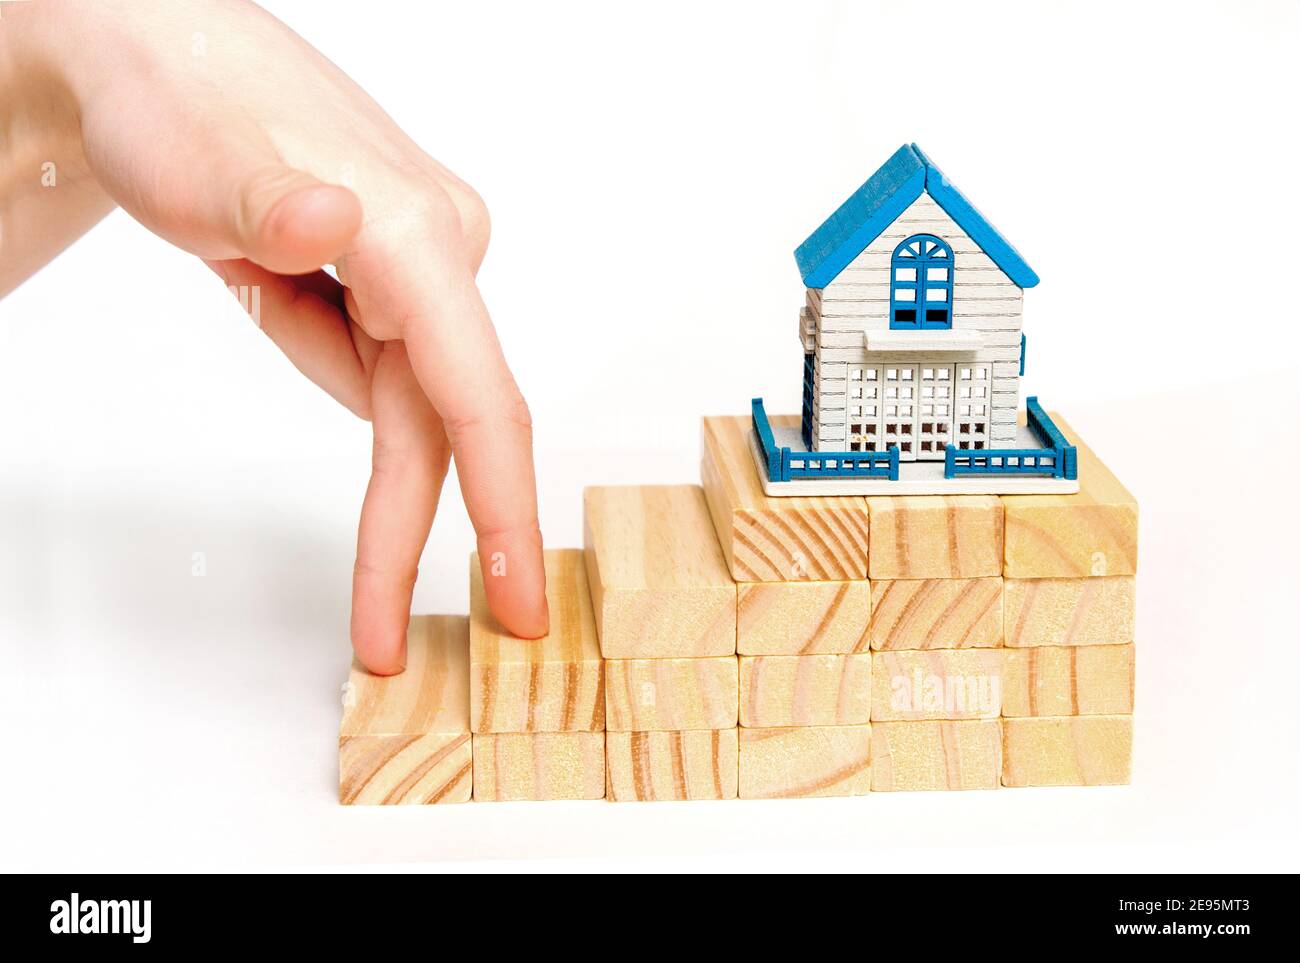 fingers stepping up on wooden blocks to miniature house on wooden board on a white background.The concept of growth in business. financial home loan Stock Photo